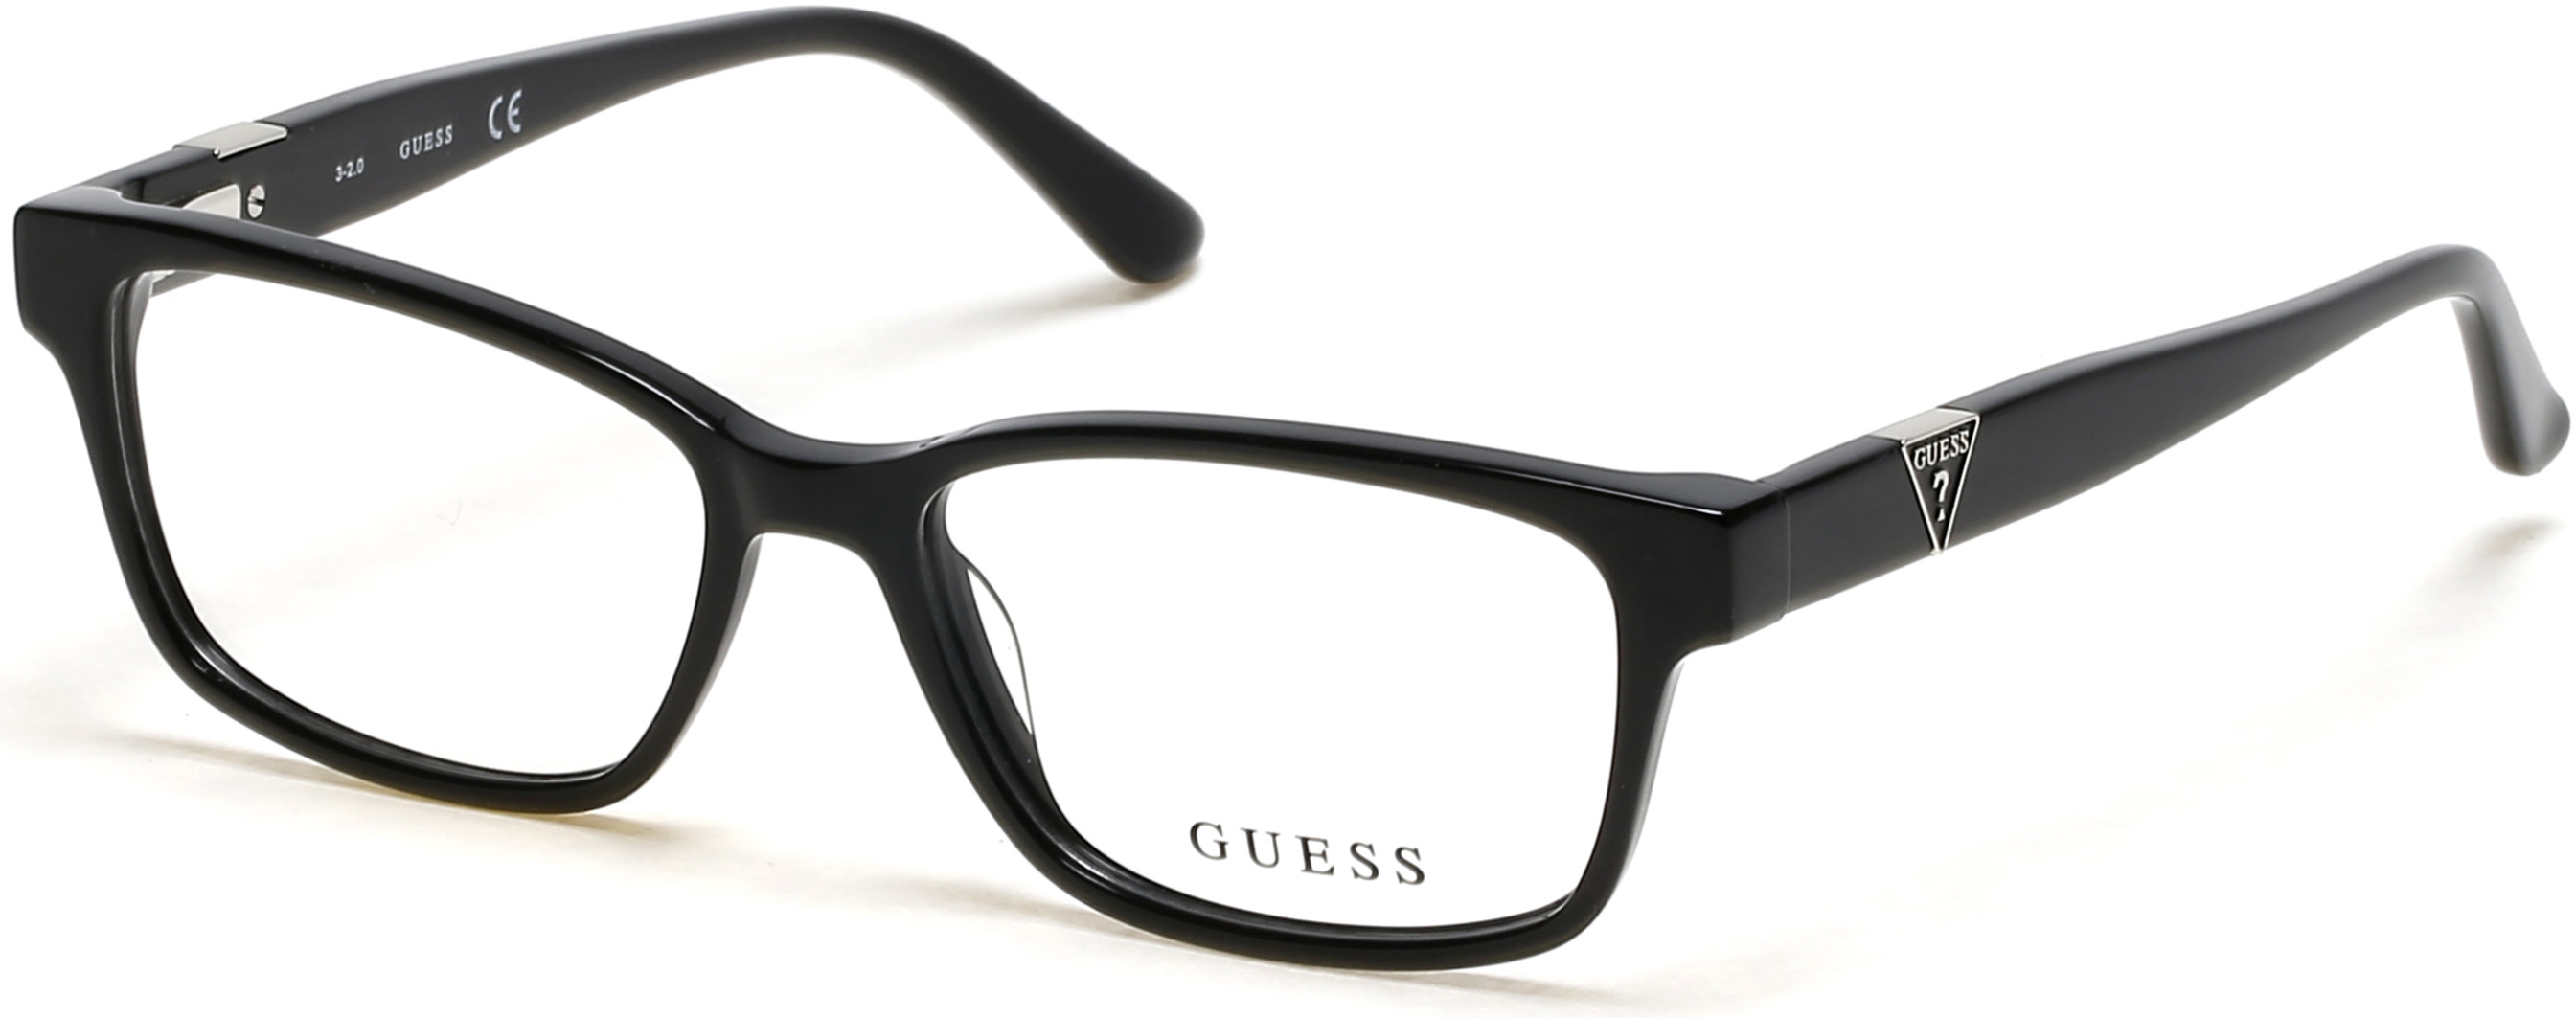 GUESS 9201